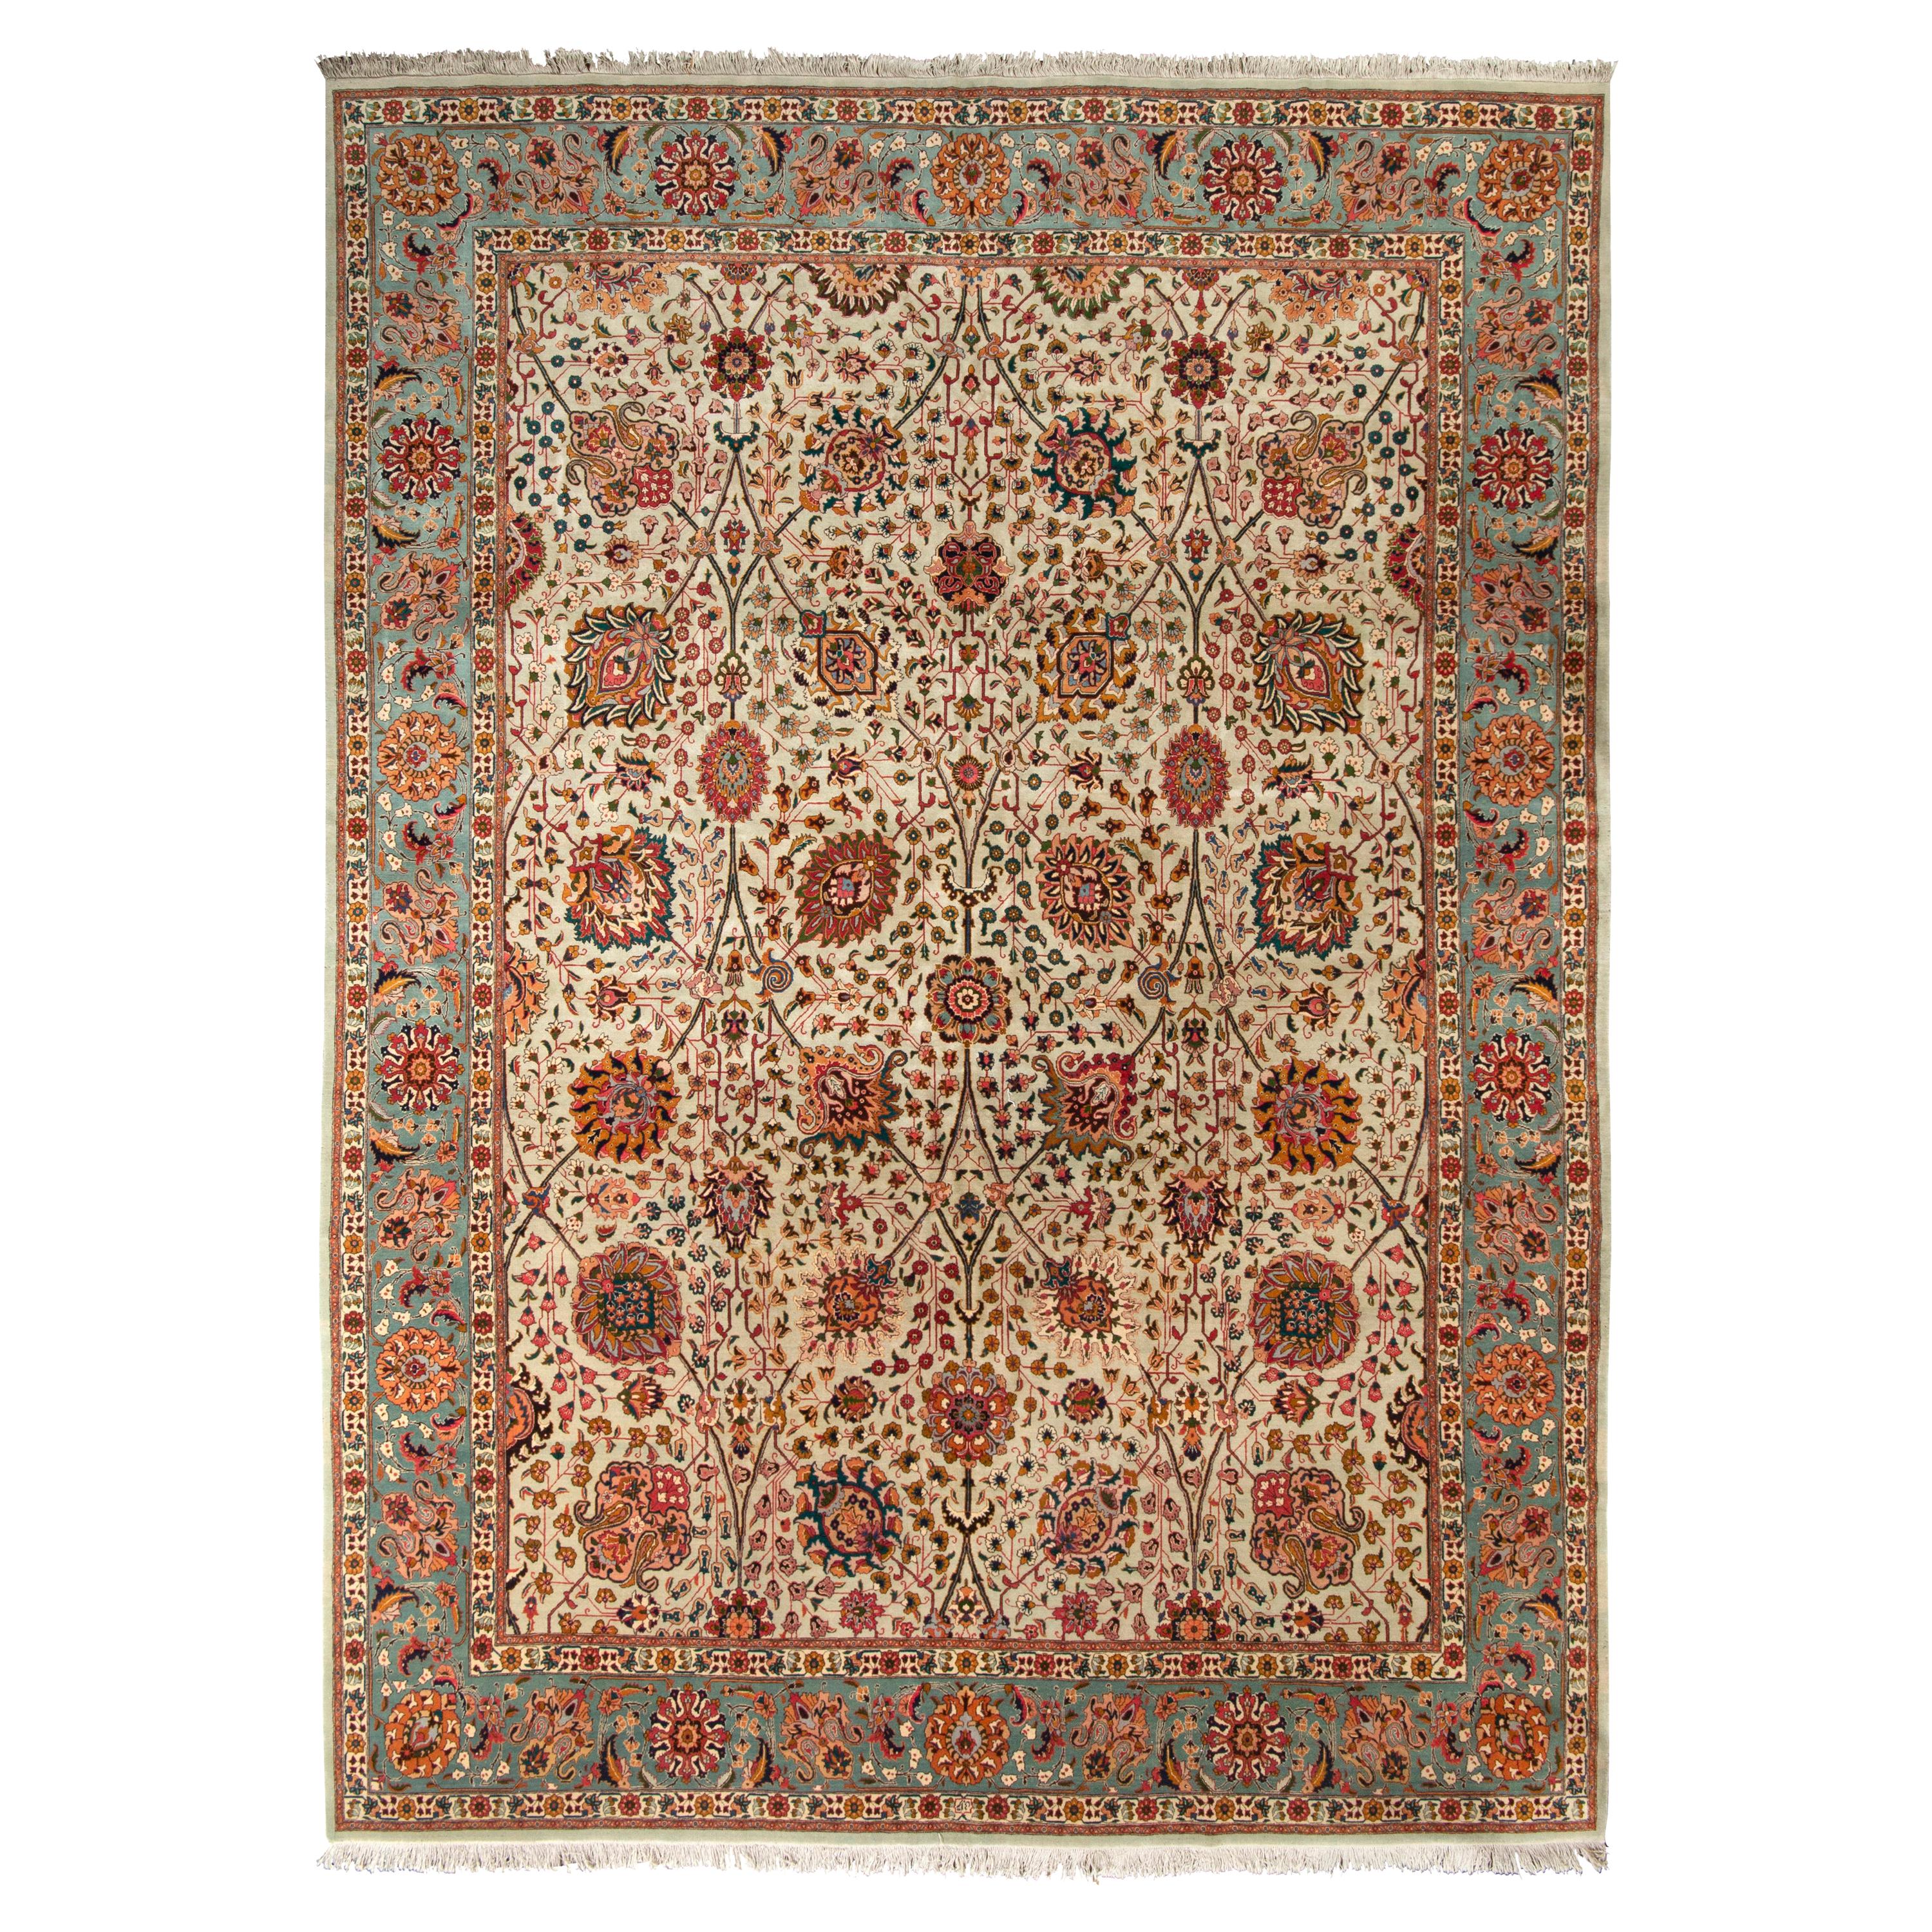 Hand-Knotted Vintage Tabriz Persian Rug in Green Floral Pattern by Rug & Kilim